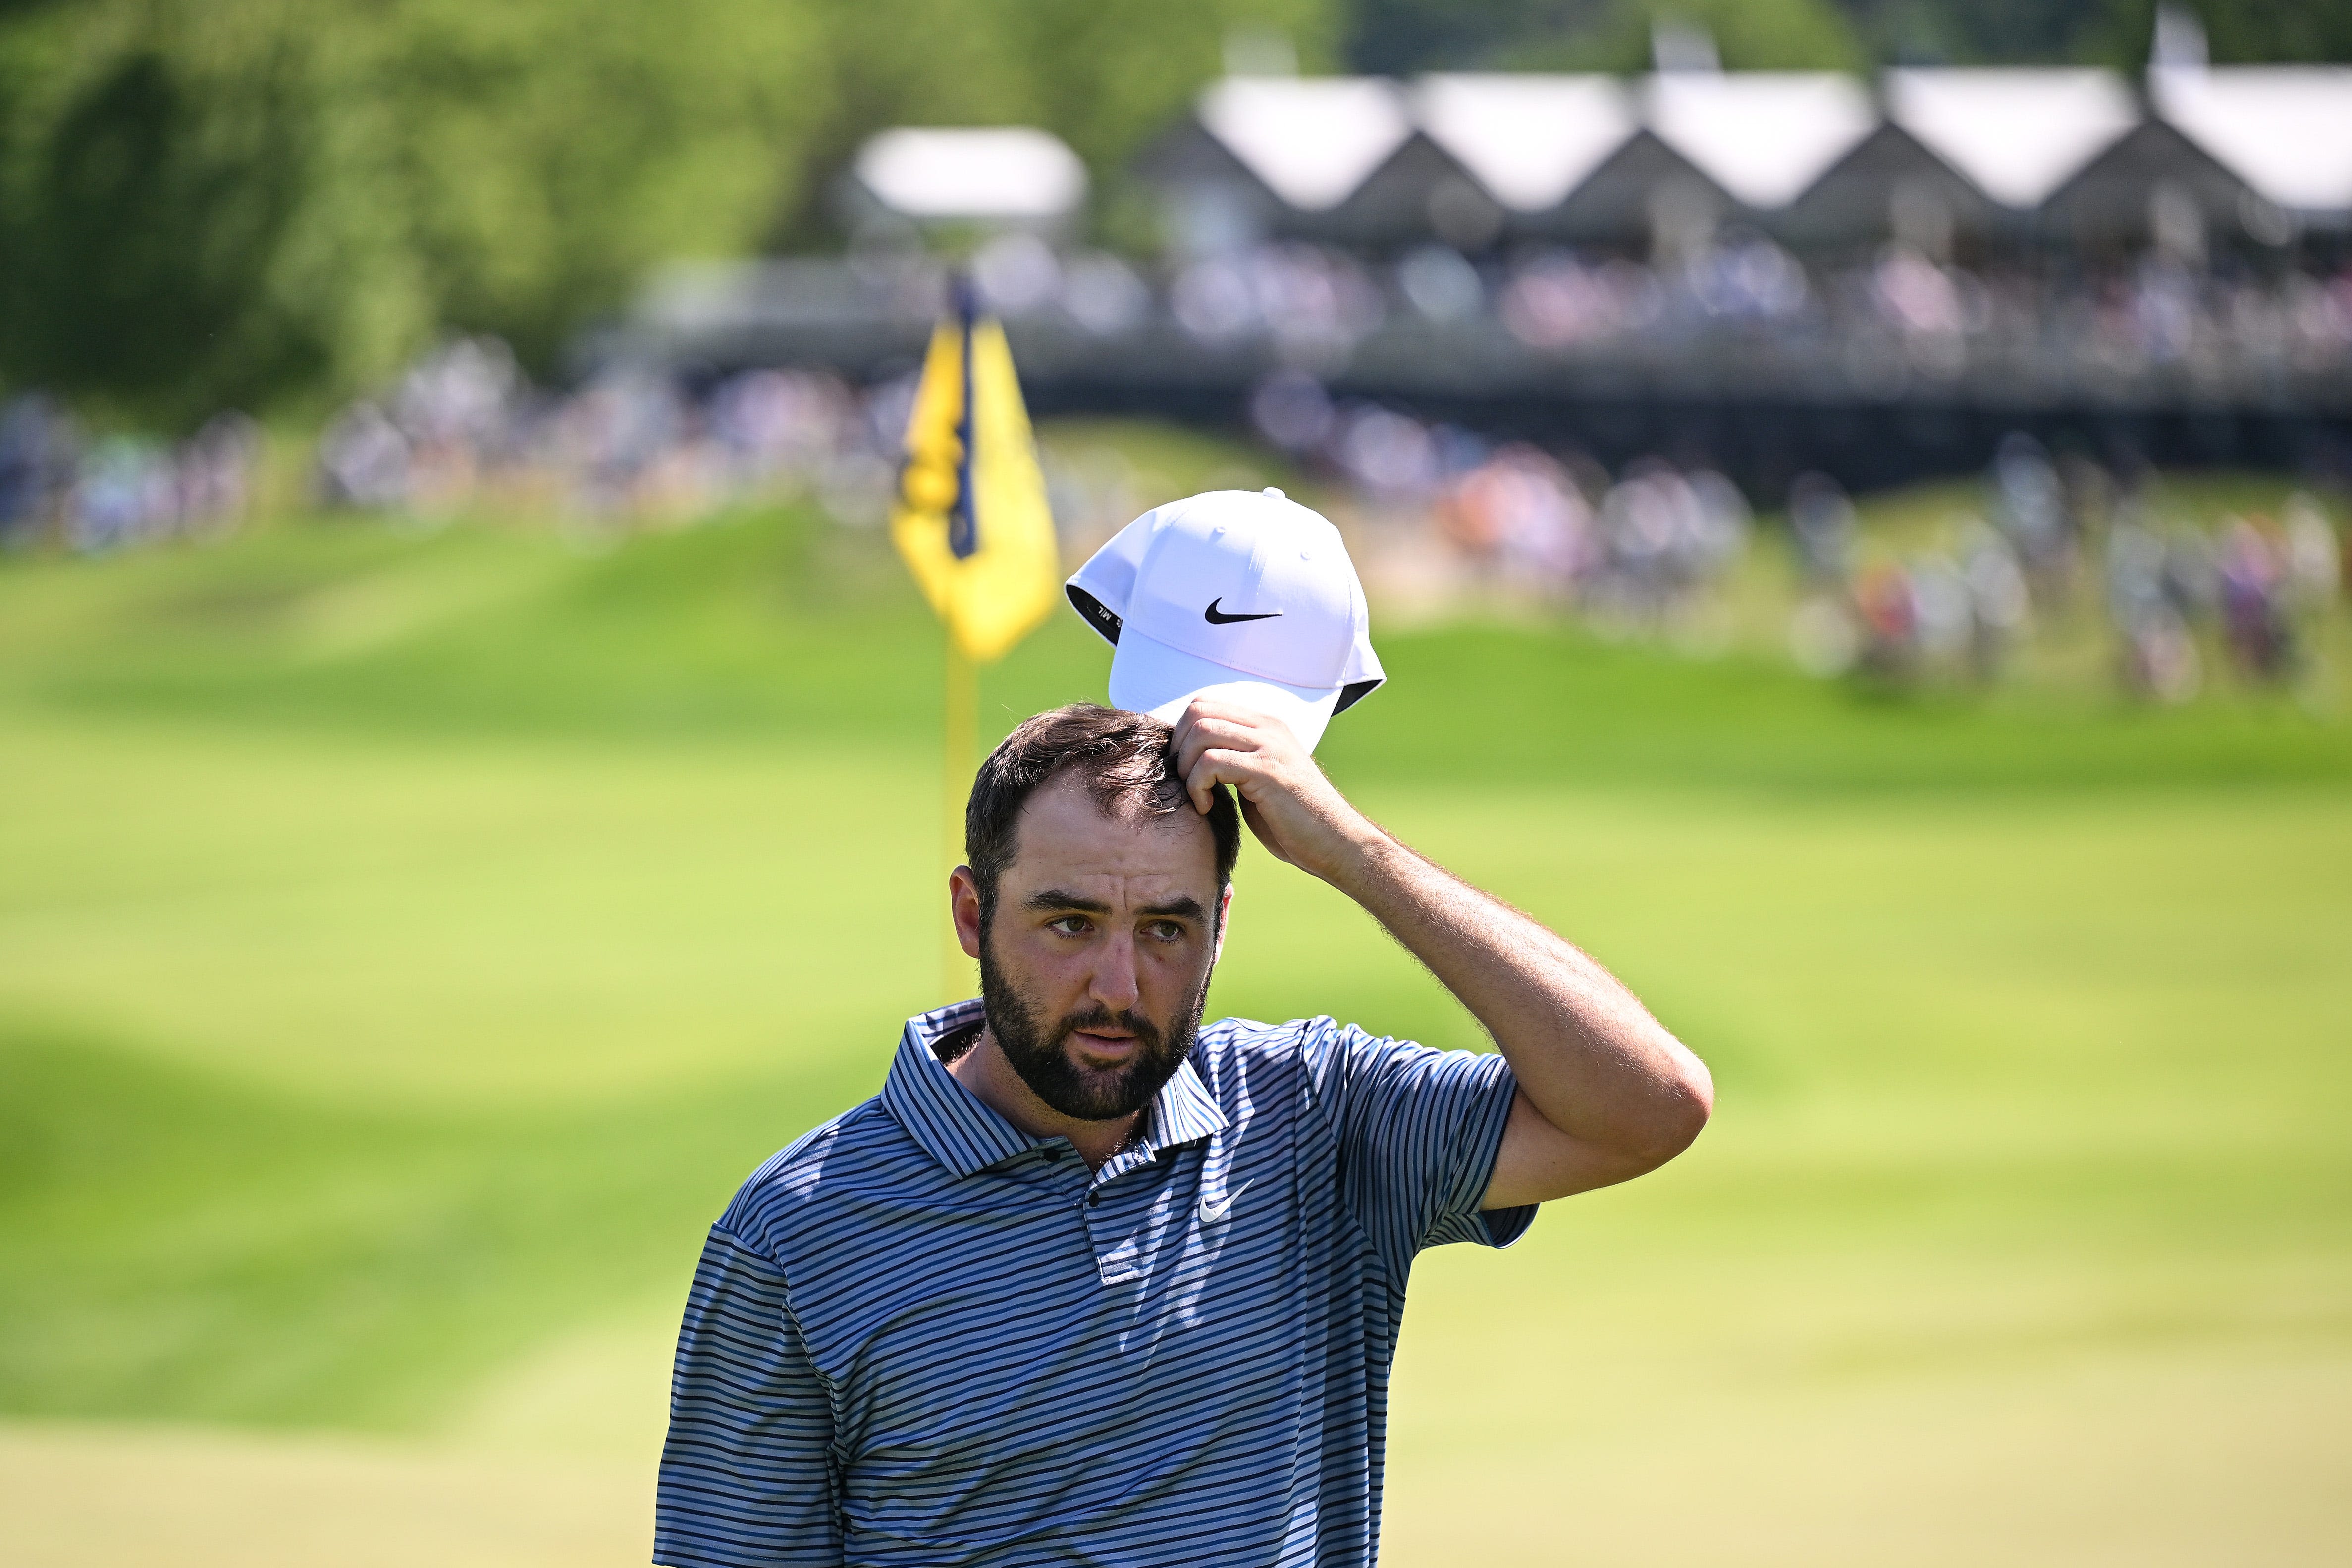 Scottie Scheffler wins PGA Championship in my revisionist history | Oller Second Thoughts